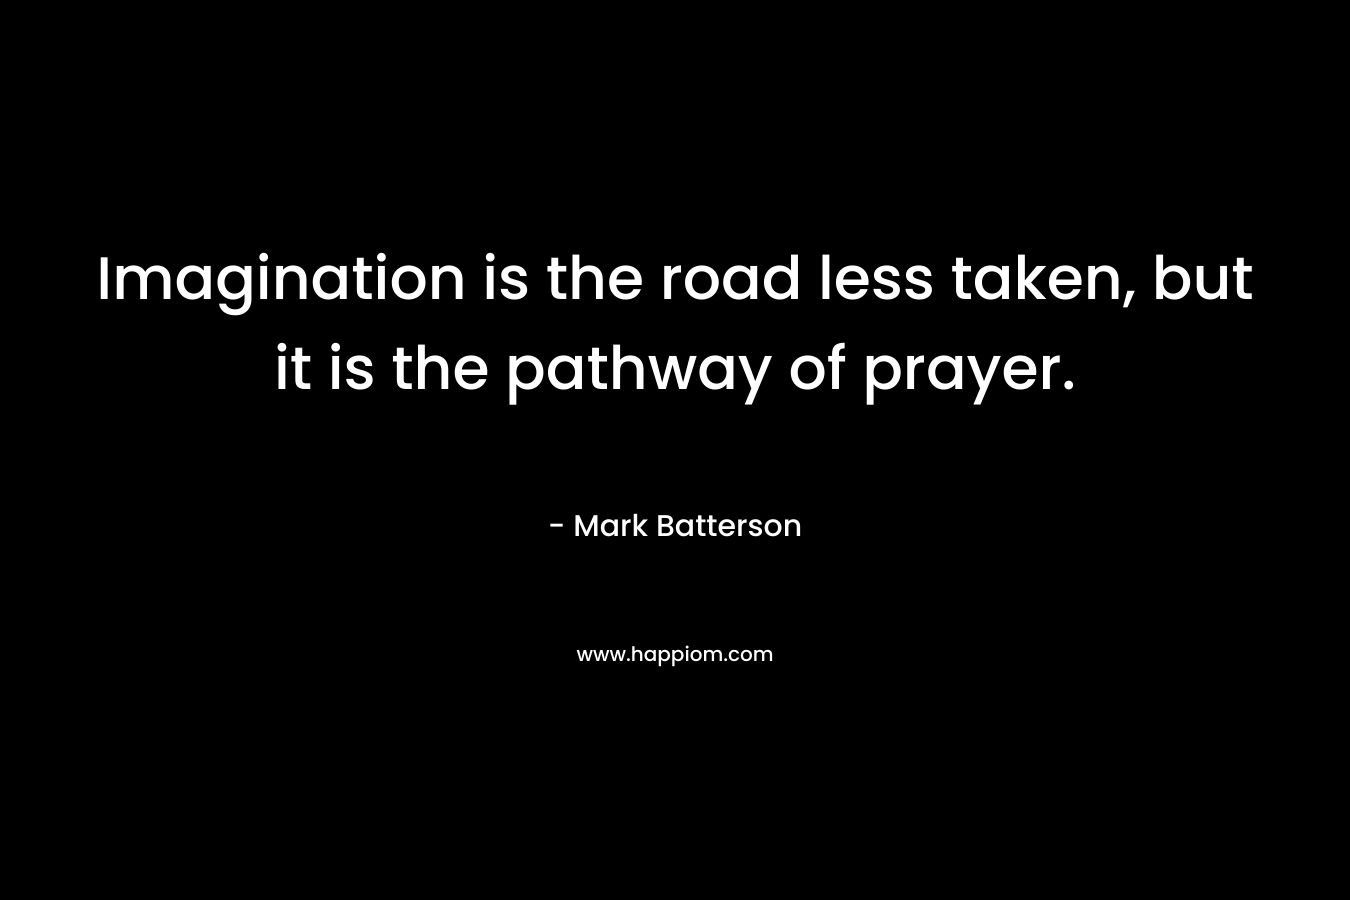 Imagination is the road less taken, but it is the pathway of prayer. – Mark Batterson